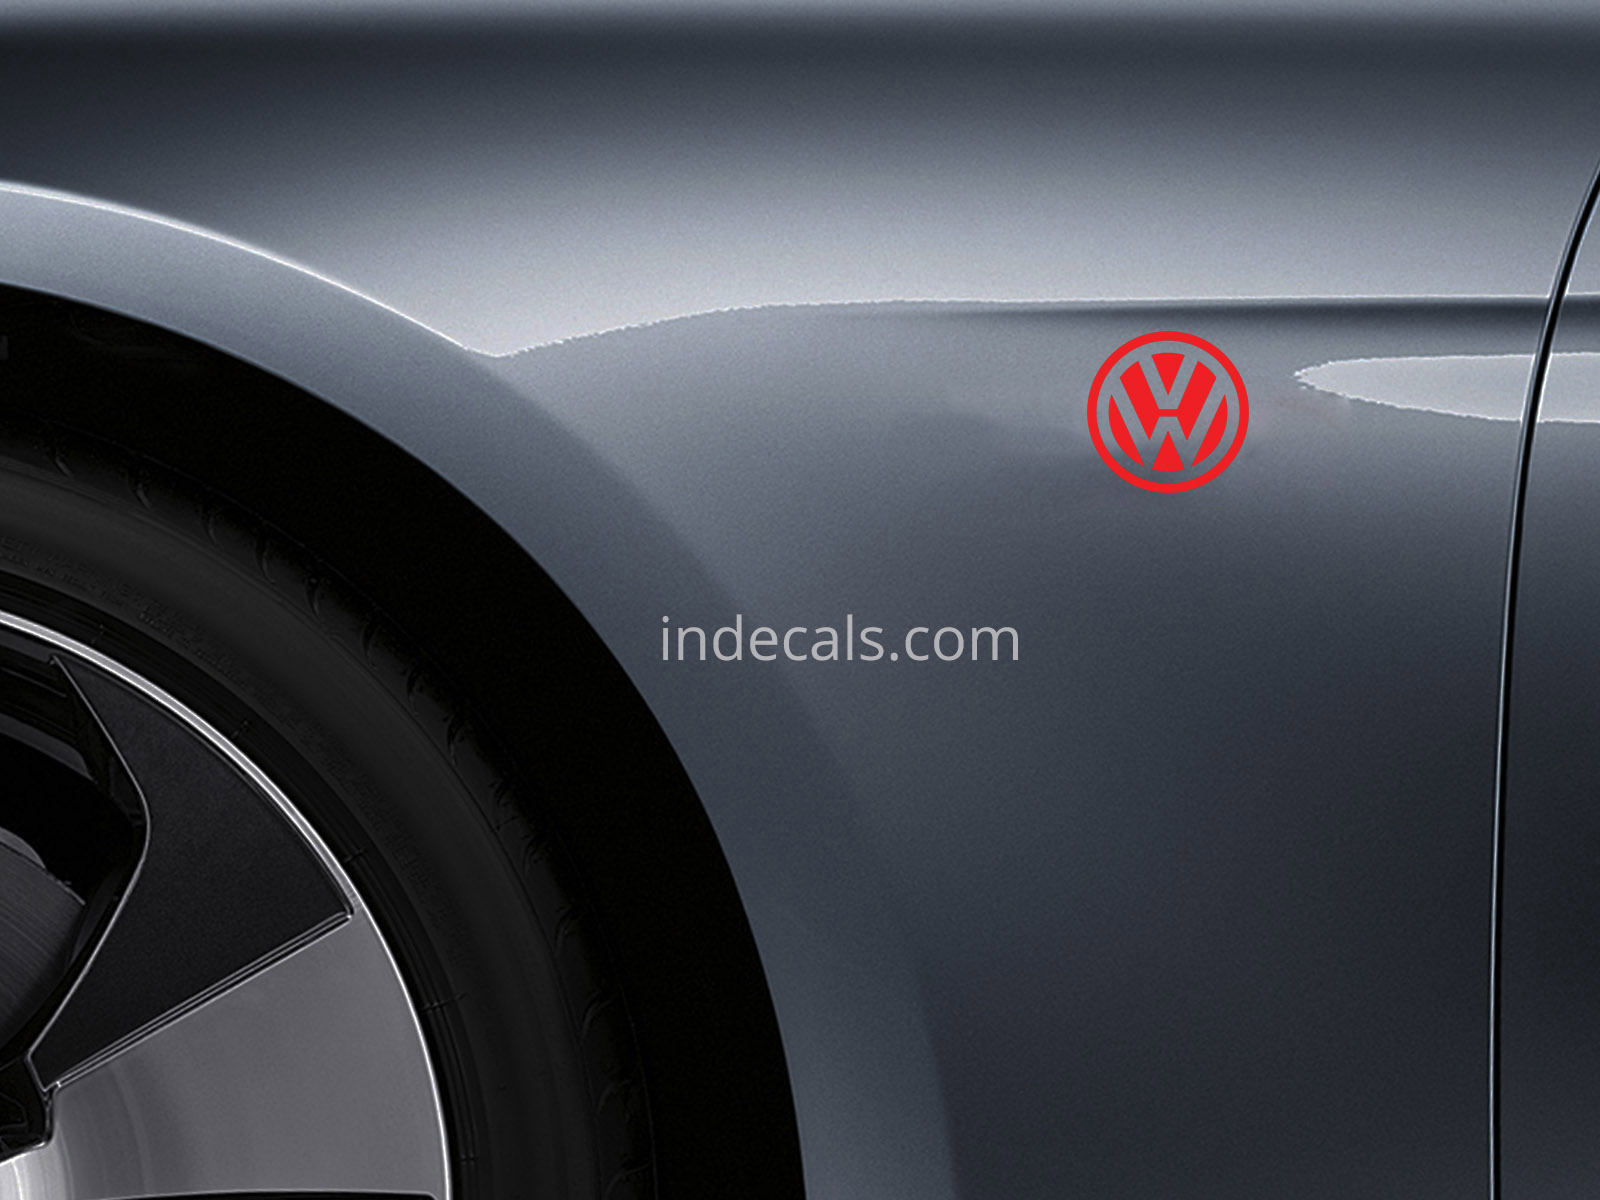 3 x Volkswagen Stickers for Wings - Red